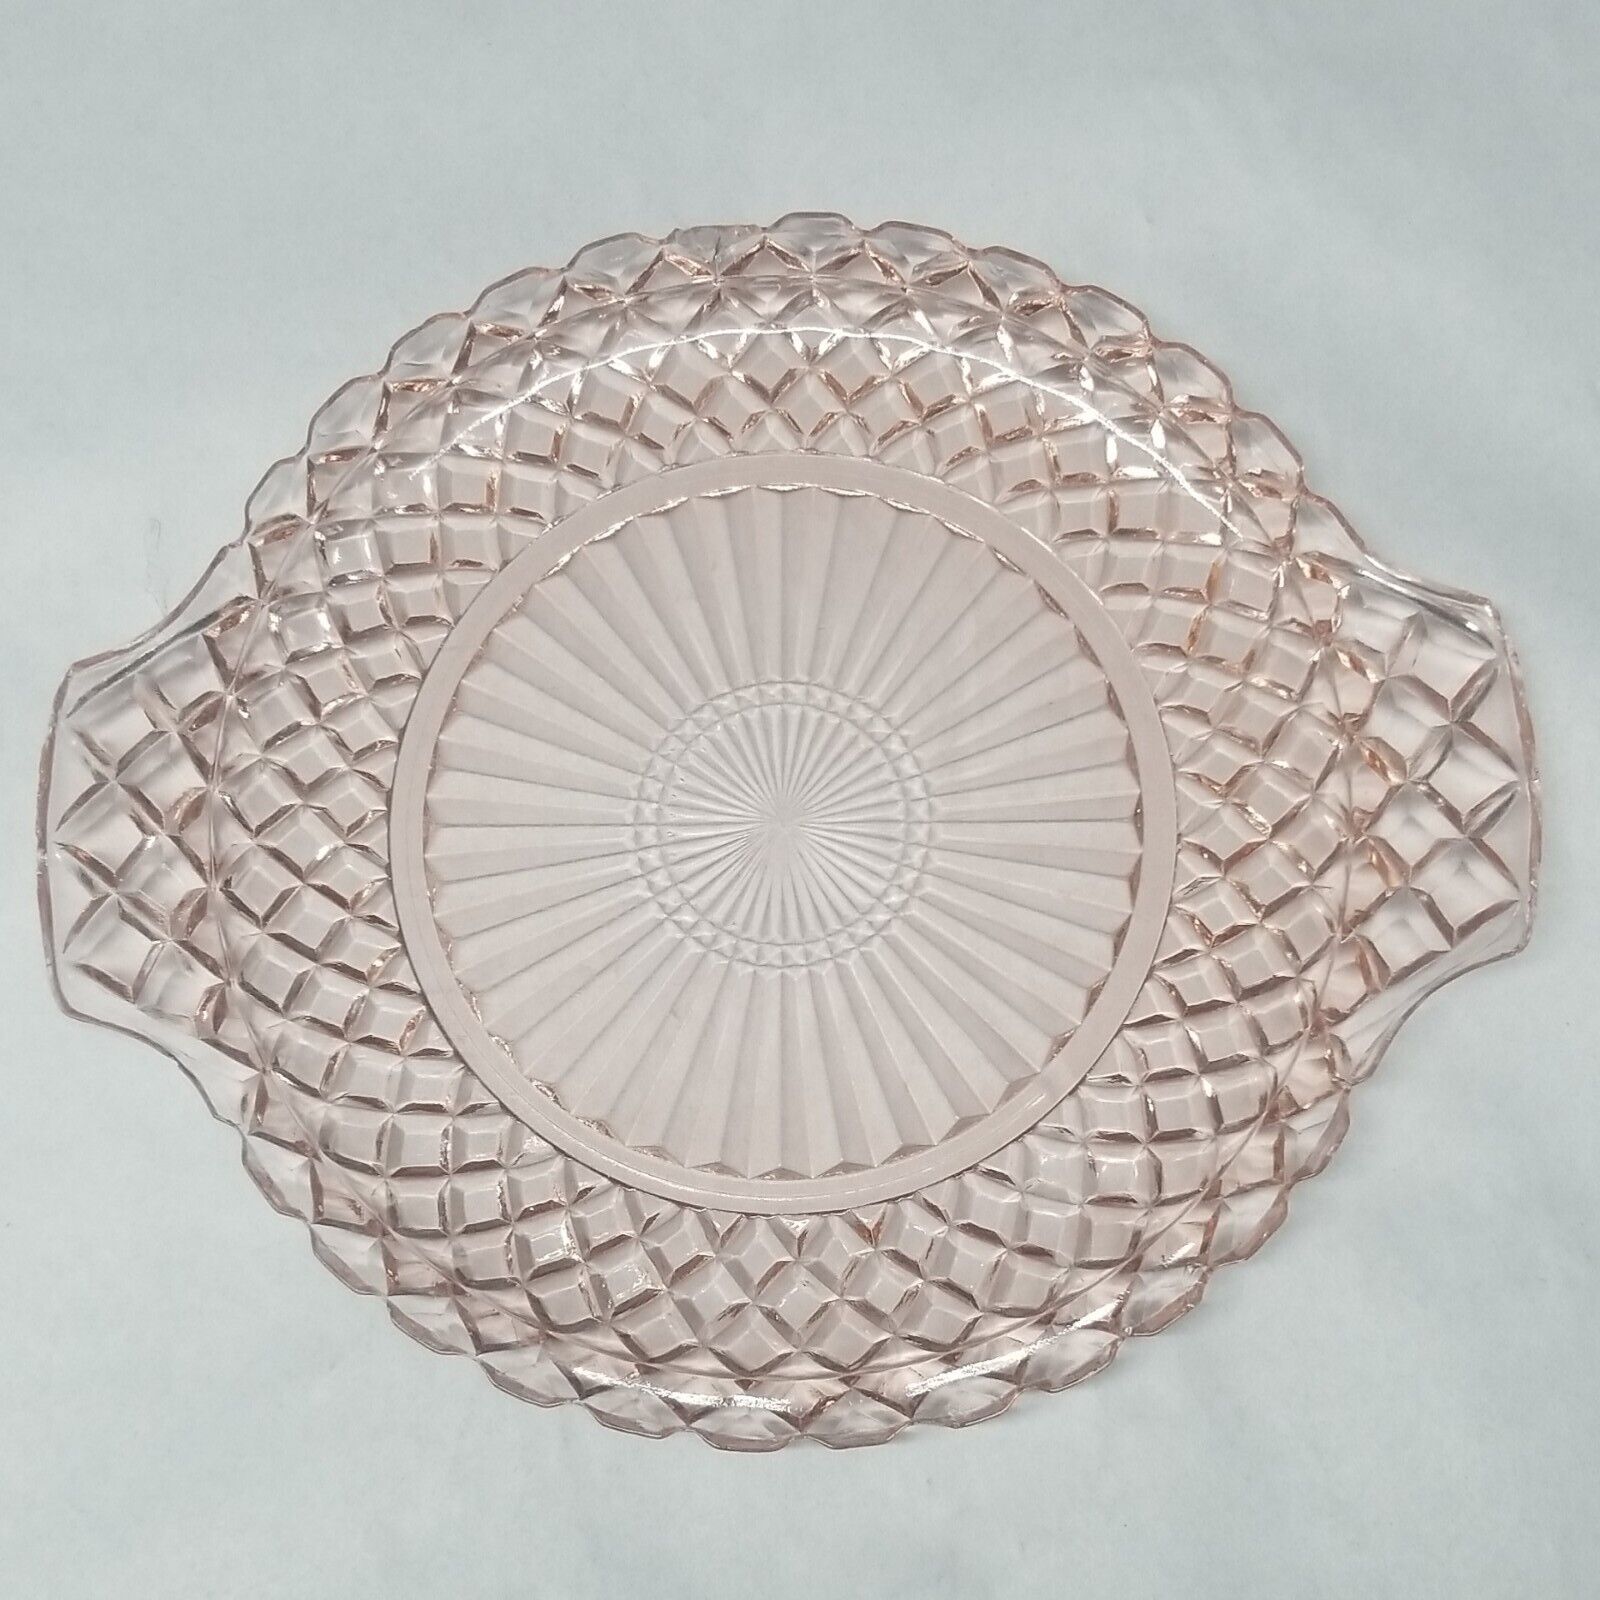 Hocking Waterford Pink 2 Handles Cake Plate Depression Glass 10¼\